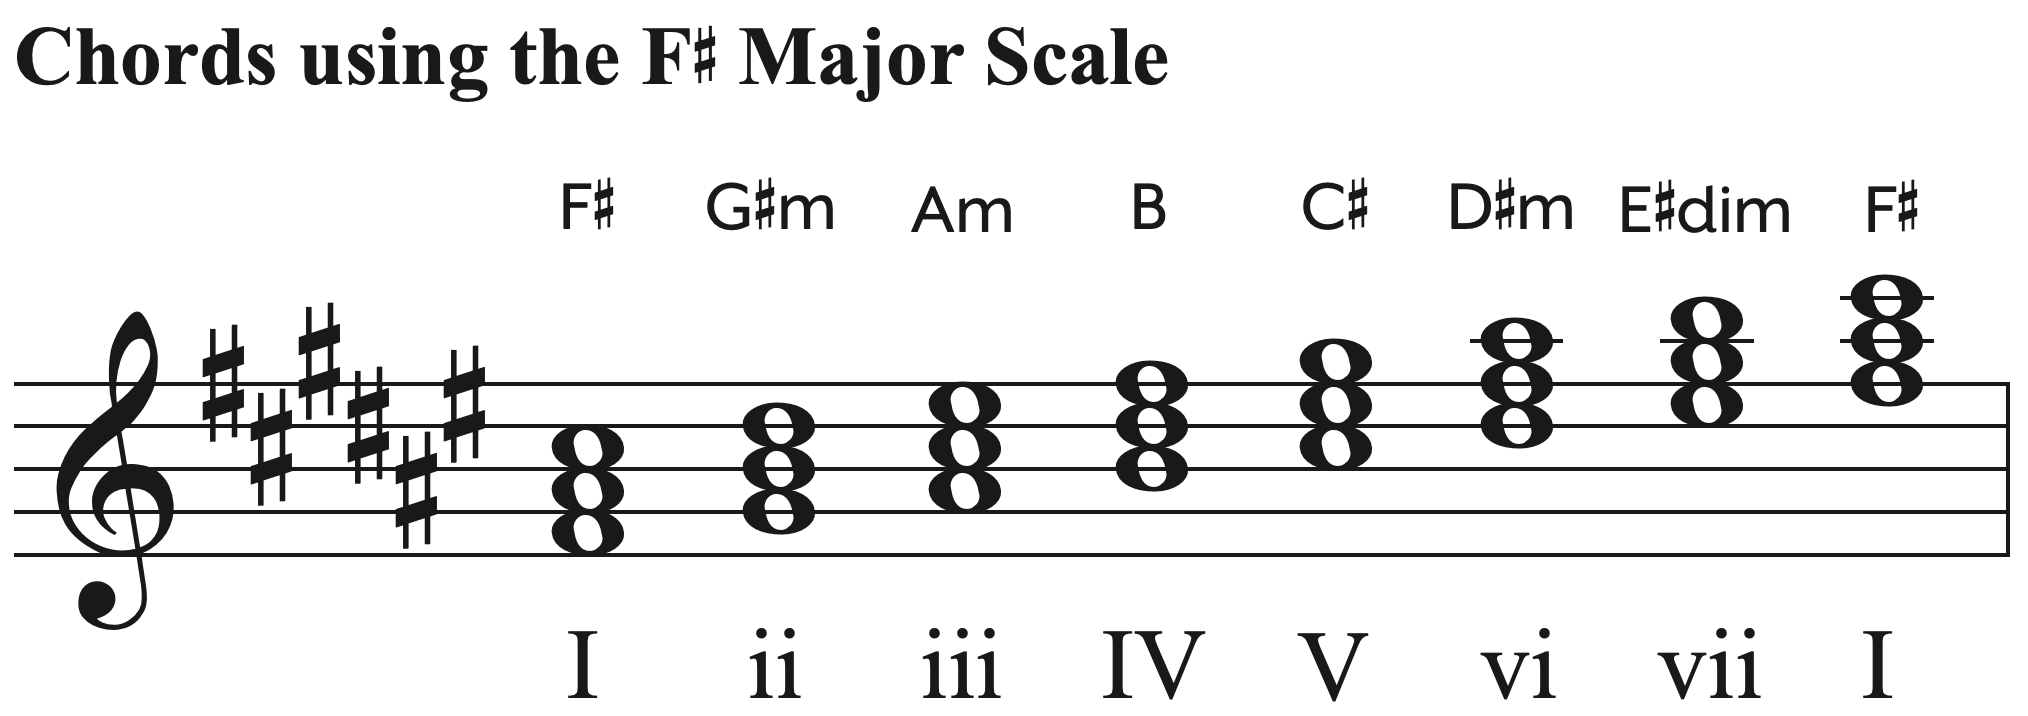 Chords using the F-sharp major scale